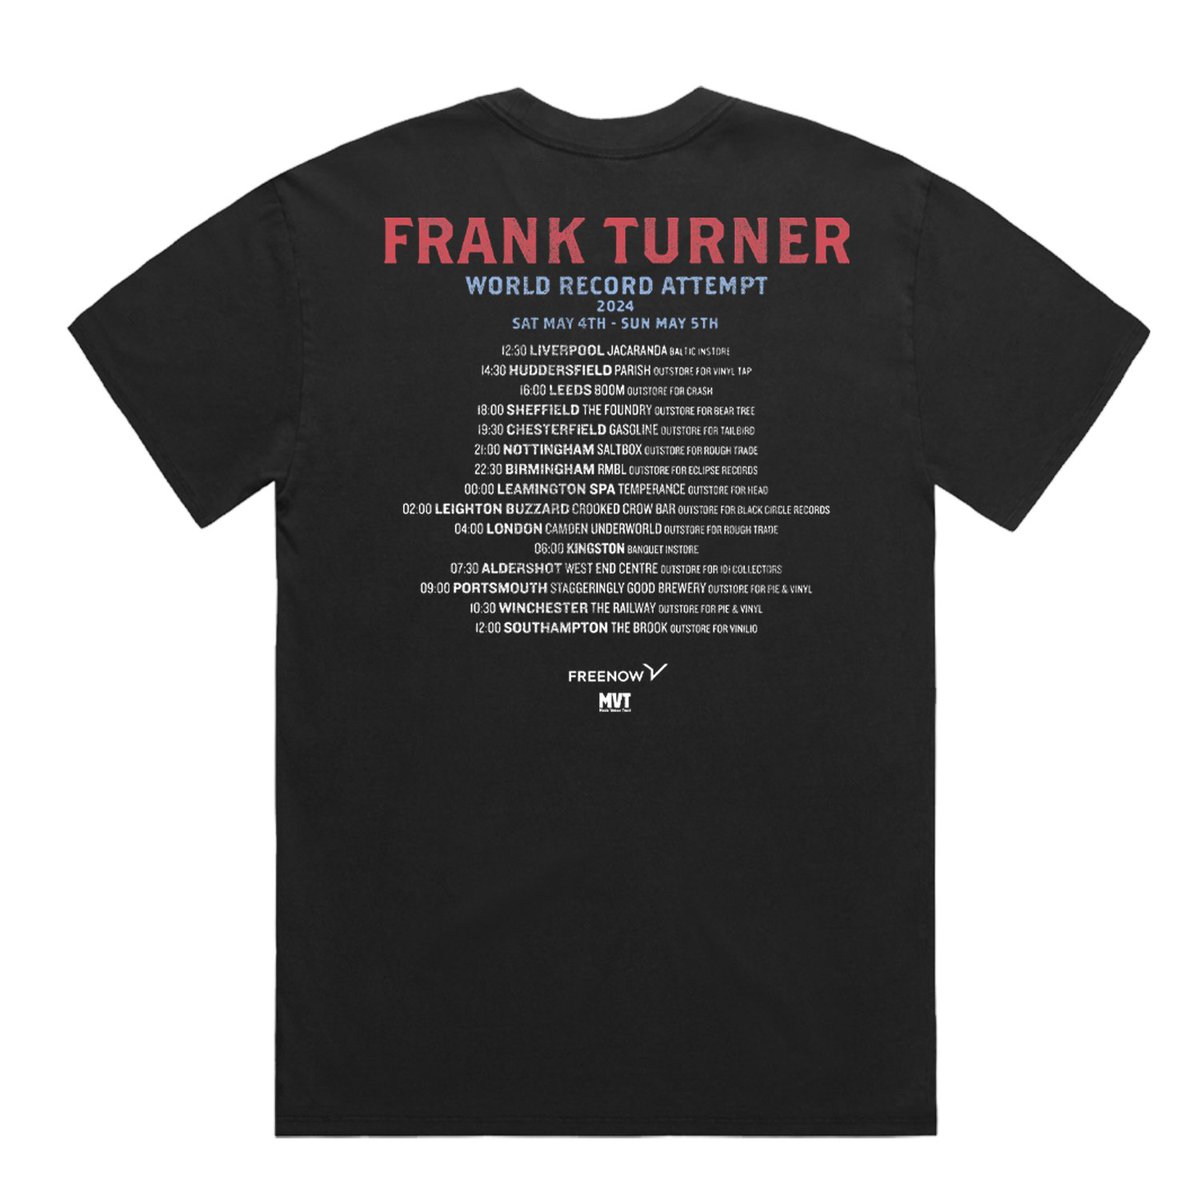 It’s a once-in-a-lifetime thing, a world record attempt, so let’s do a T-shirt! Limited edition & only available for a limited time. You have until Tues 10am UK to bag one. 50% of profits will be donated to the @musicvenuetrust. You can purchase one now: frank-turner.backstreetmerch.com